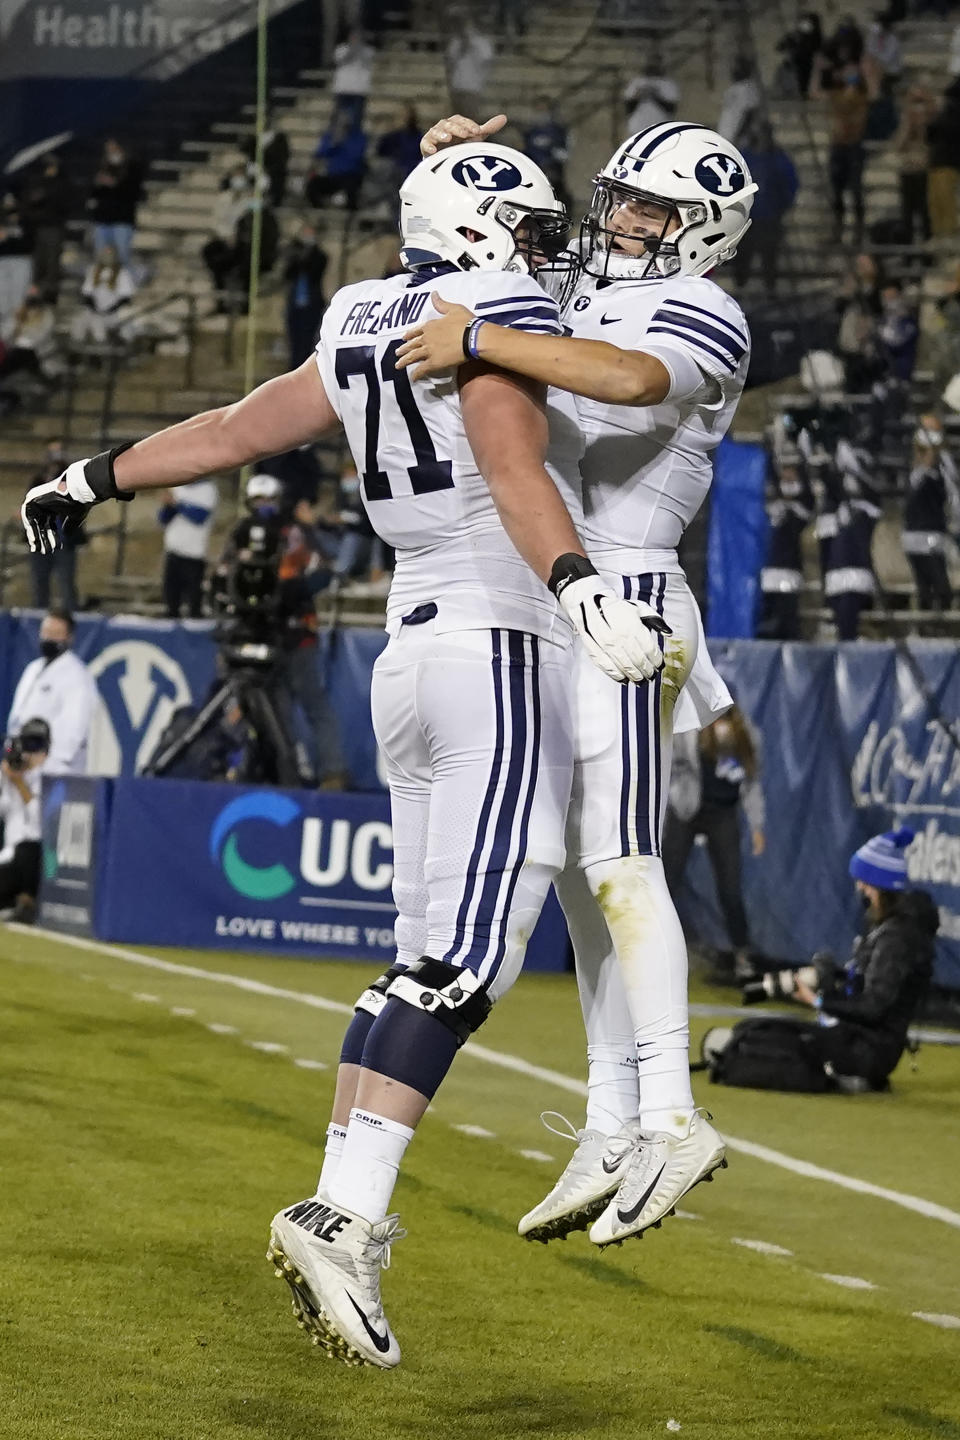 BYU quarterback Zach Wilson, right, celebrates with offensive lineman Blake Freeland after scoring against Western Kentucky during the first half of an NCAA college football game Saturday, Oct. 31, 2020, in Provo, Utah. (AP Photo/Rick Bowmer, Pool)